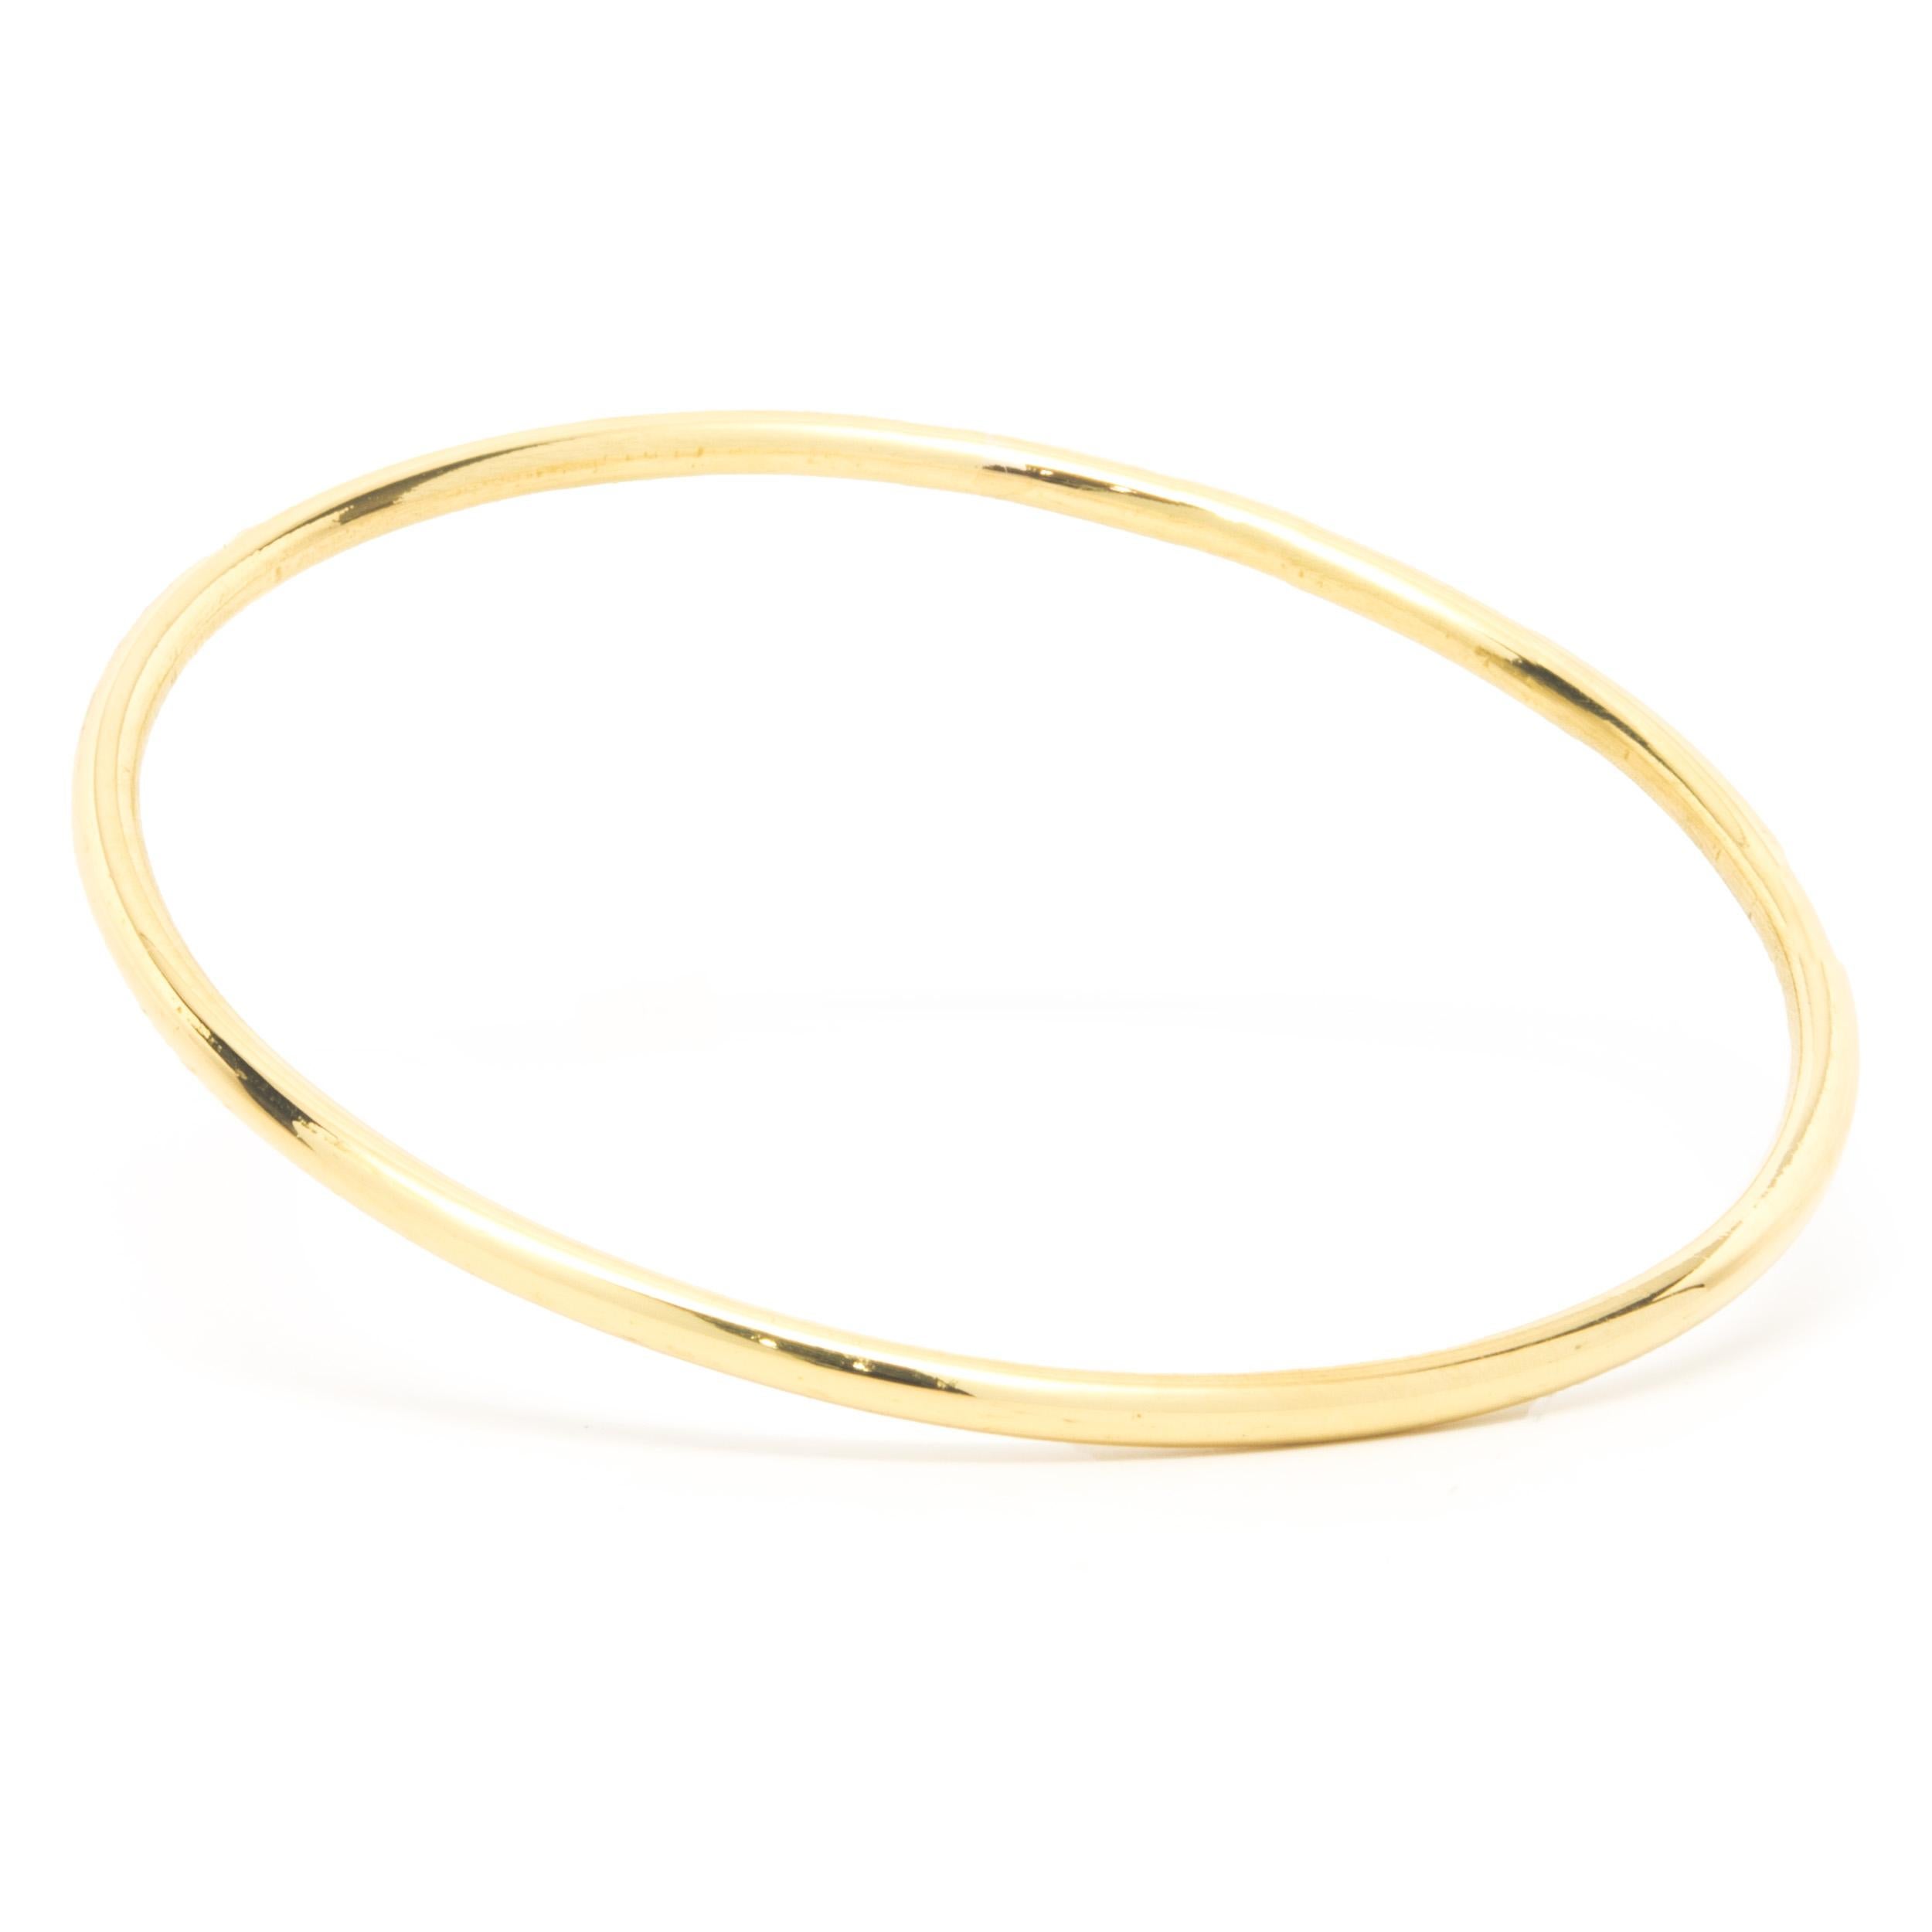 Material: 18K yellow gold
Dimensions: bracelet will fit up to a 7.5-inch wrist
Weight: 20.94 grams